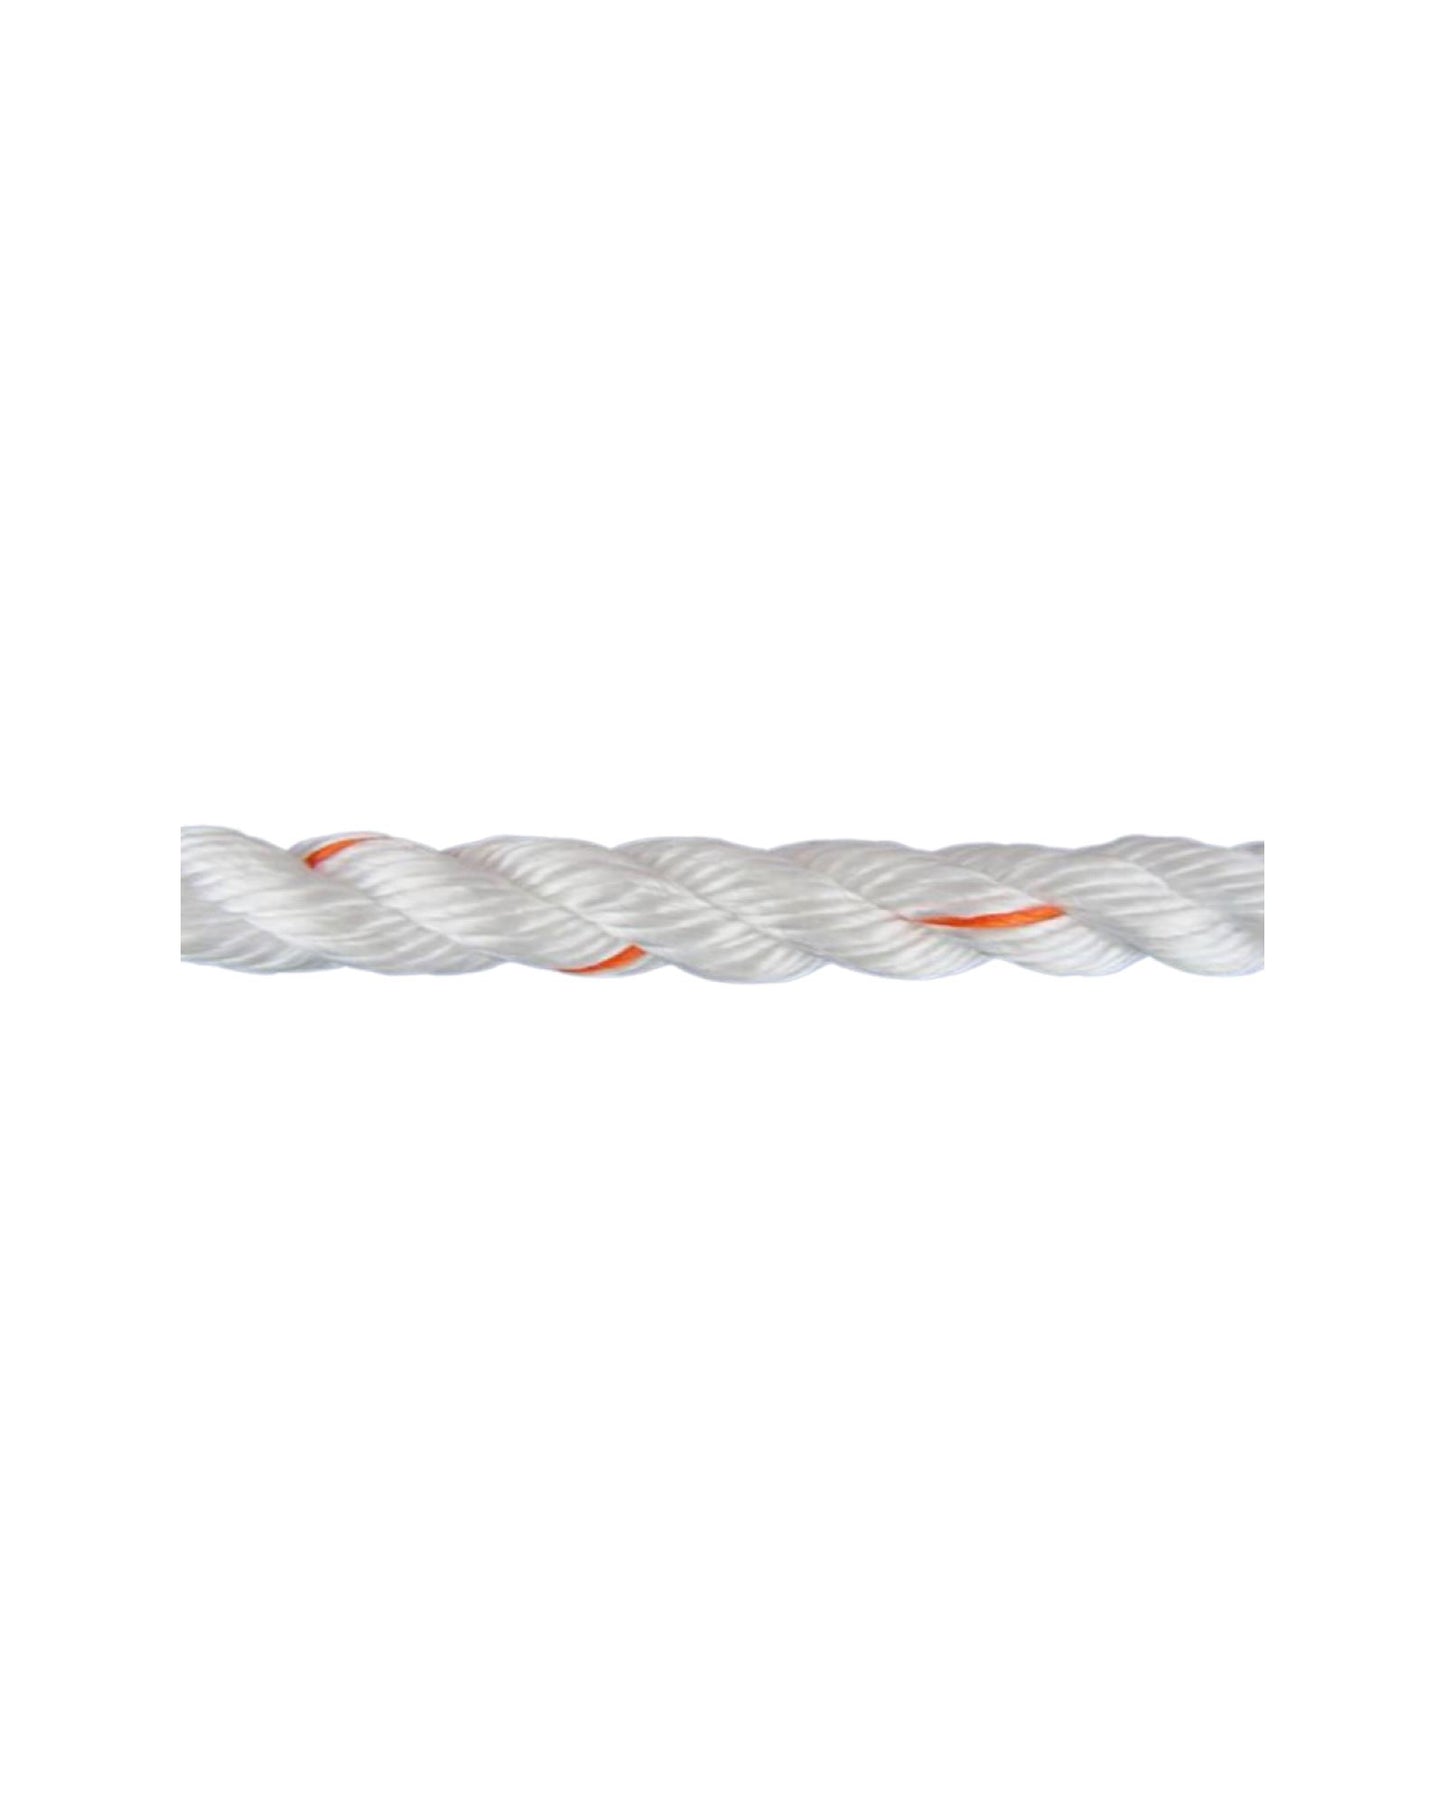 Aamstrand 5/8" 3 Strand Poly-Dac Rope - 14149 Ropes Aamstrand 